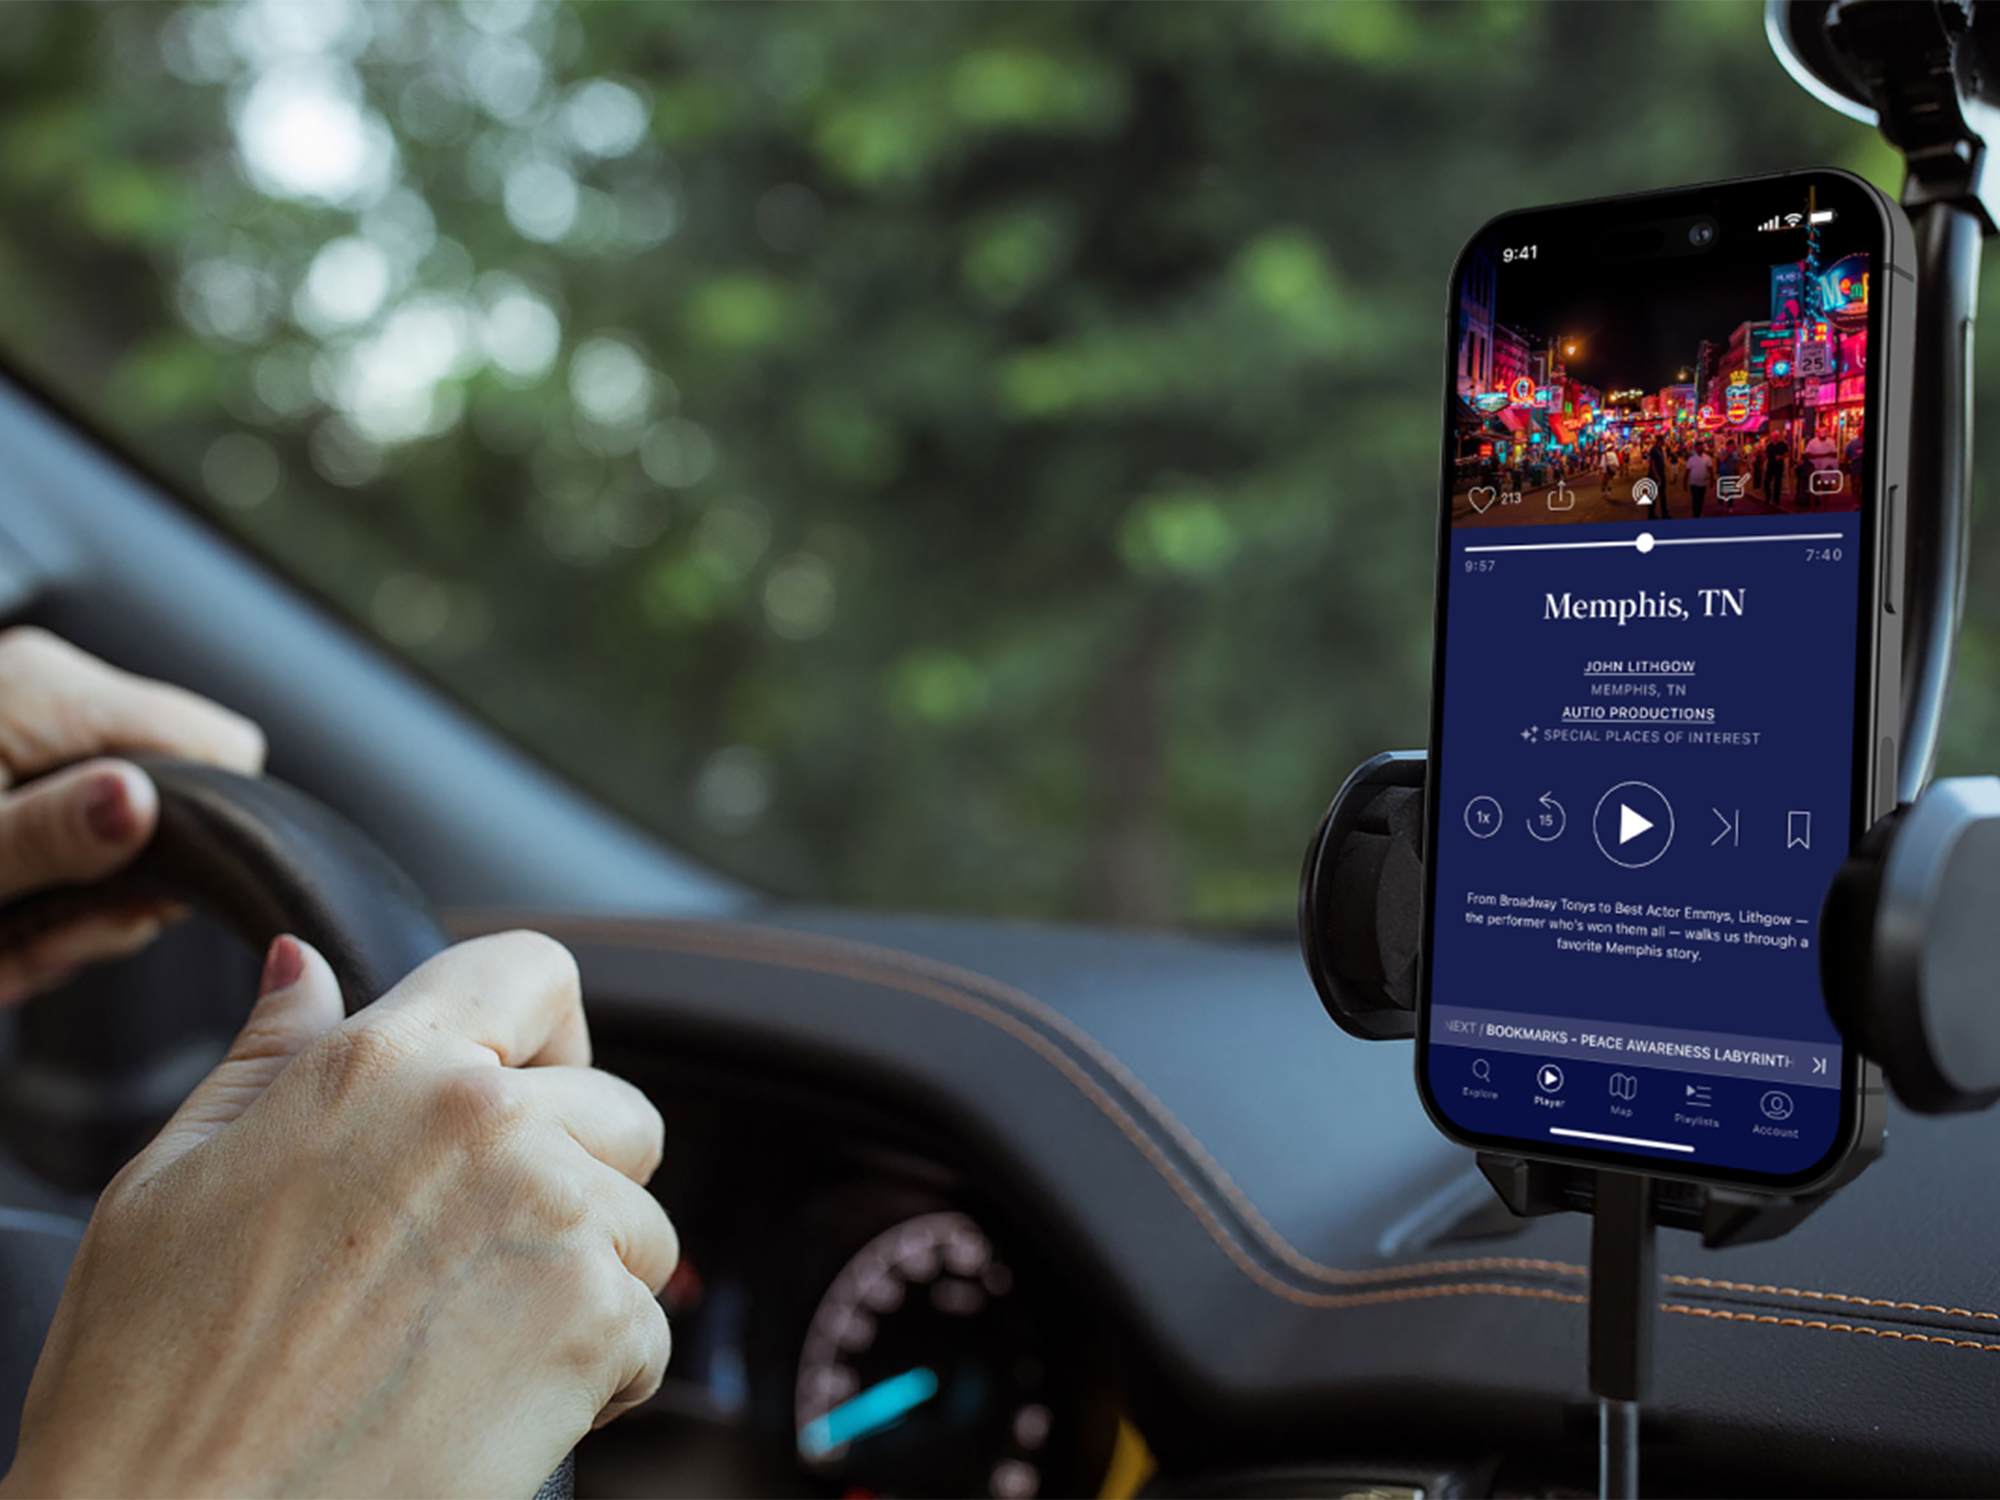 This road trip narration app with voices like Kevin Costner's is $30 off